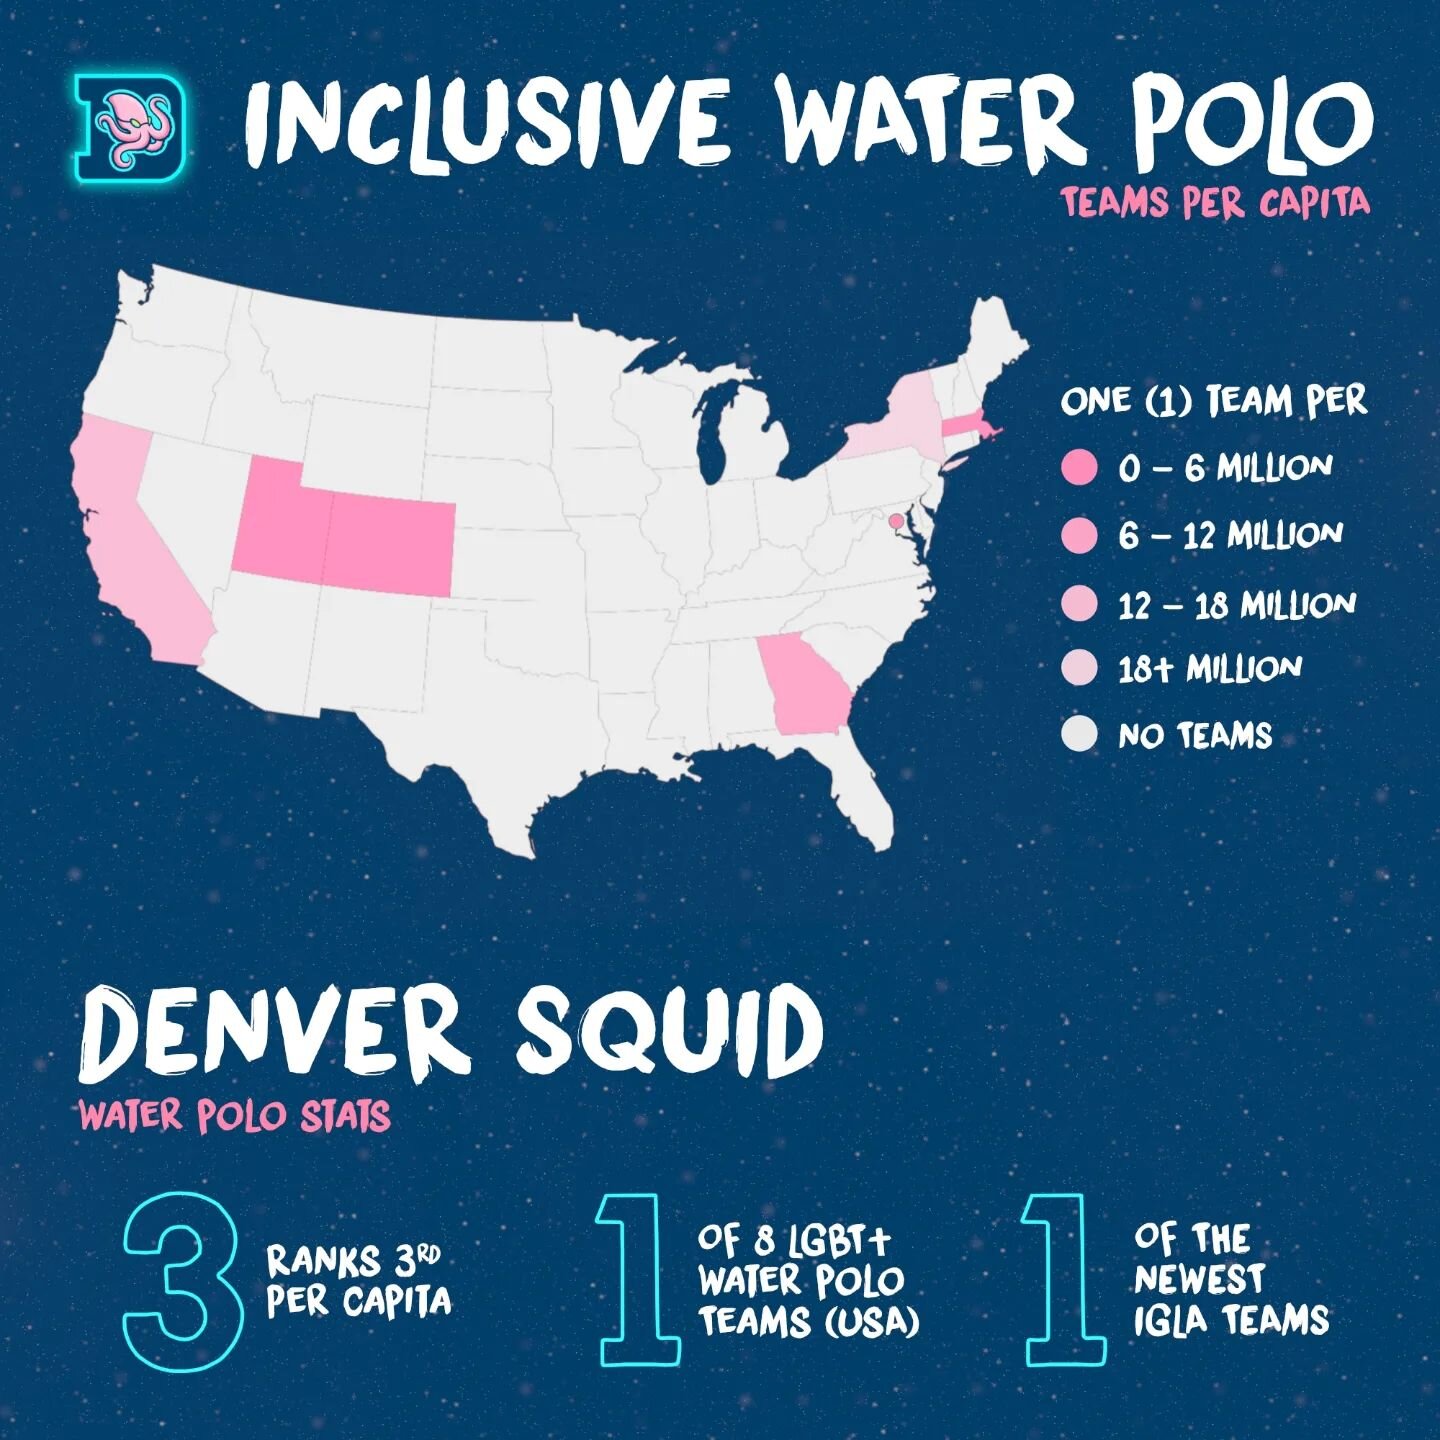 Some interesting info about inclusive (LGBT+) water polo in the United States and the world. ***Info based on teams associated with IGLA

Hmmm 🤔